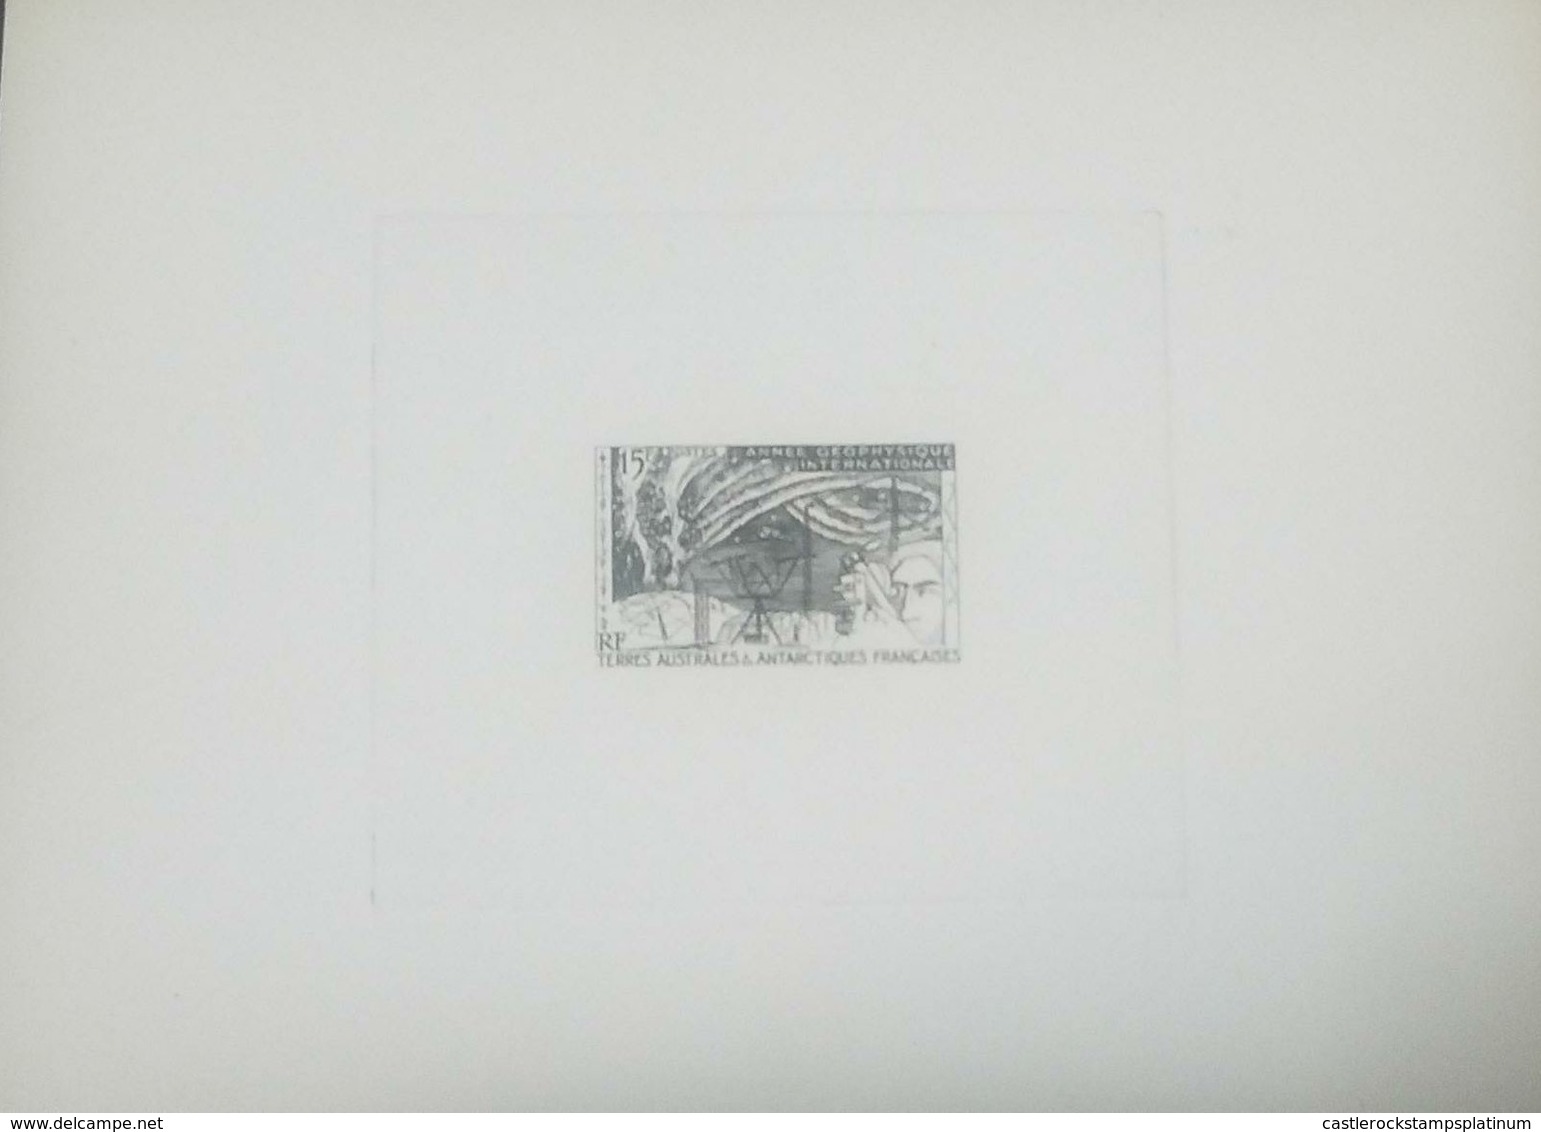 O) 1957 FRENCH SOUTHERN AND ANTARCTIC TERRITORIES, PROOF ARTIST STAGE, POLAR OBSERVATION- INTERNATIONAL GEOPHYSICAL YEAR - Imperforates, Proofs & Errors